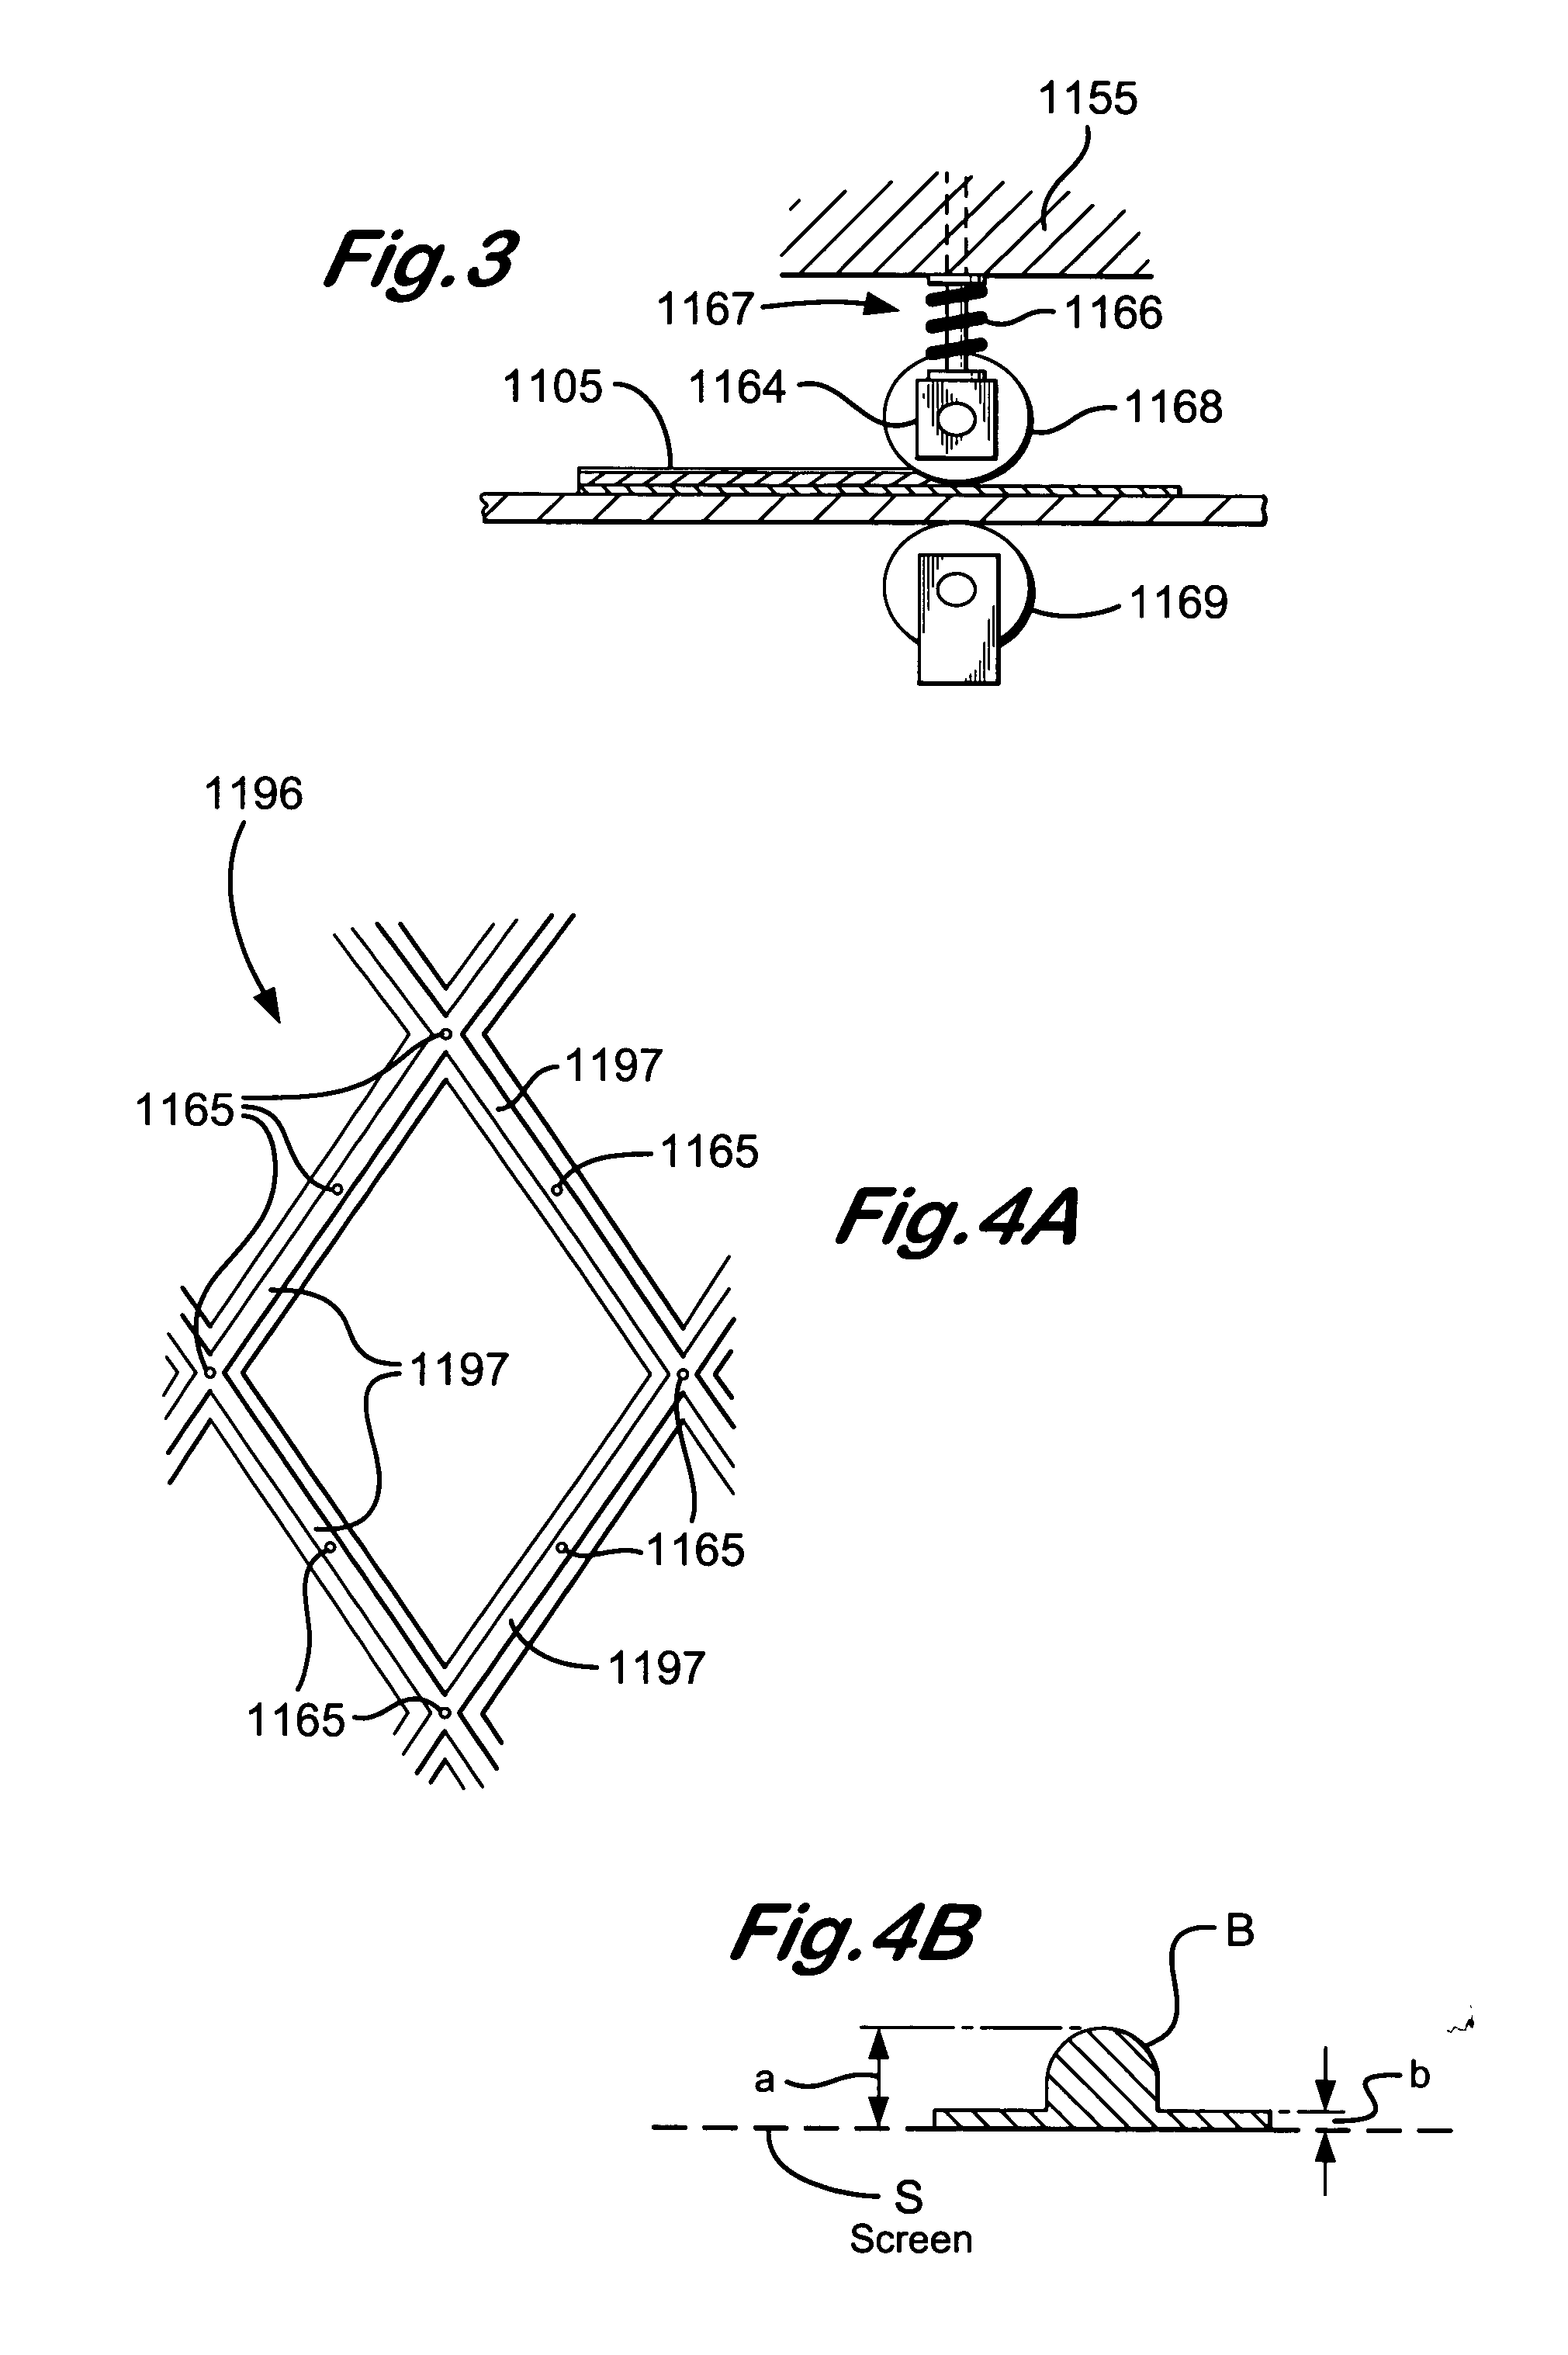 Apparatuses and methods for making glued screen assemblies